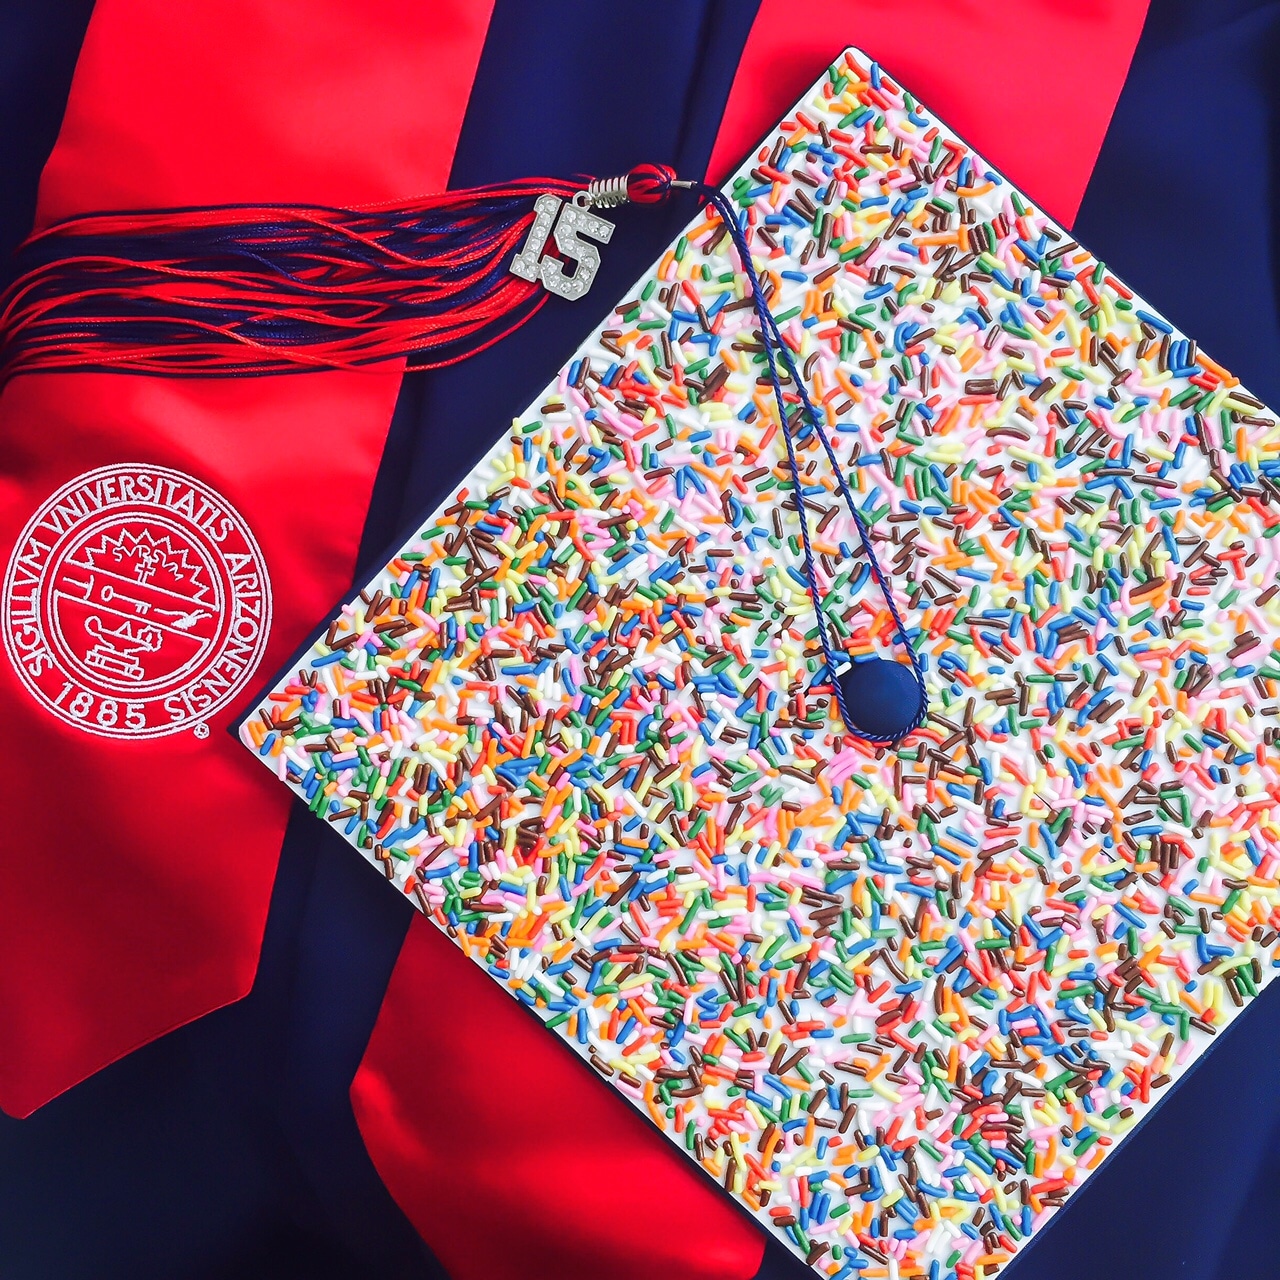 Blogger Business Goals: From Student to Blogger to Author to... what's next? -- The Desserts With Benefits Blog, Jessica's Graduation Cap